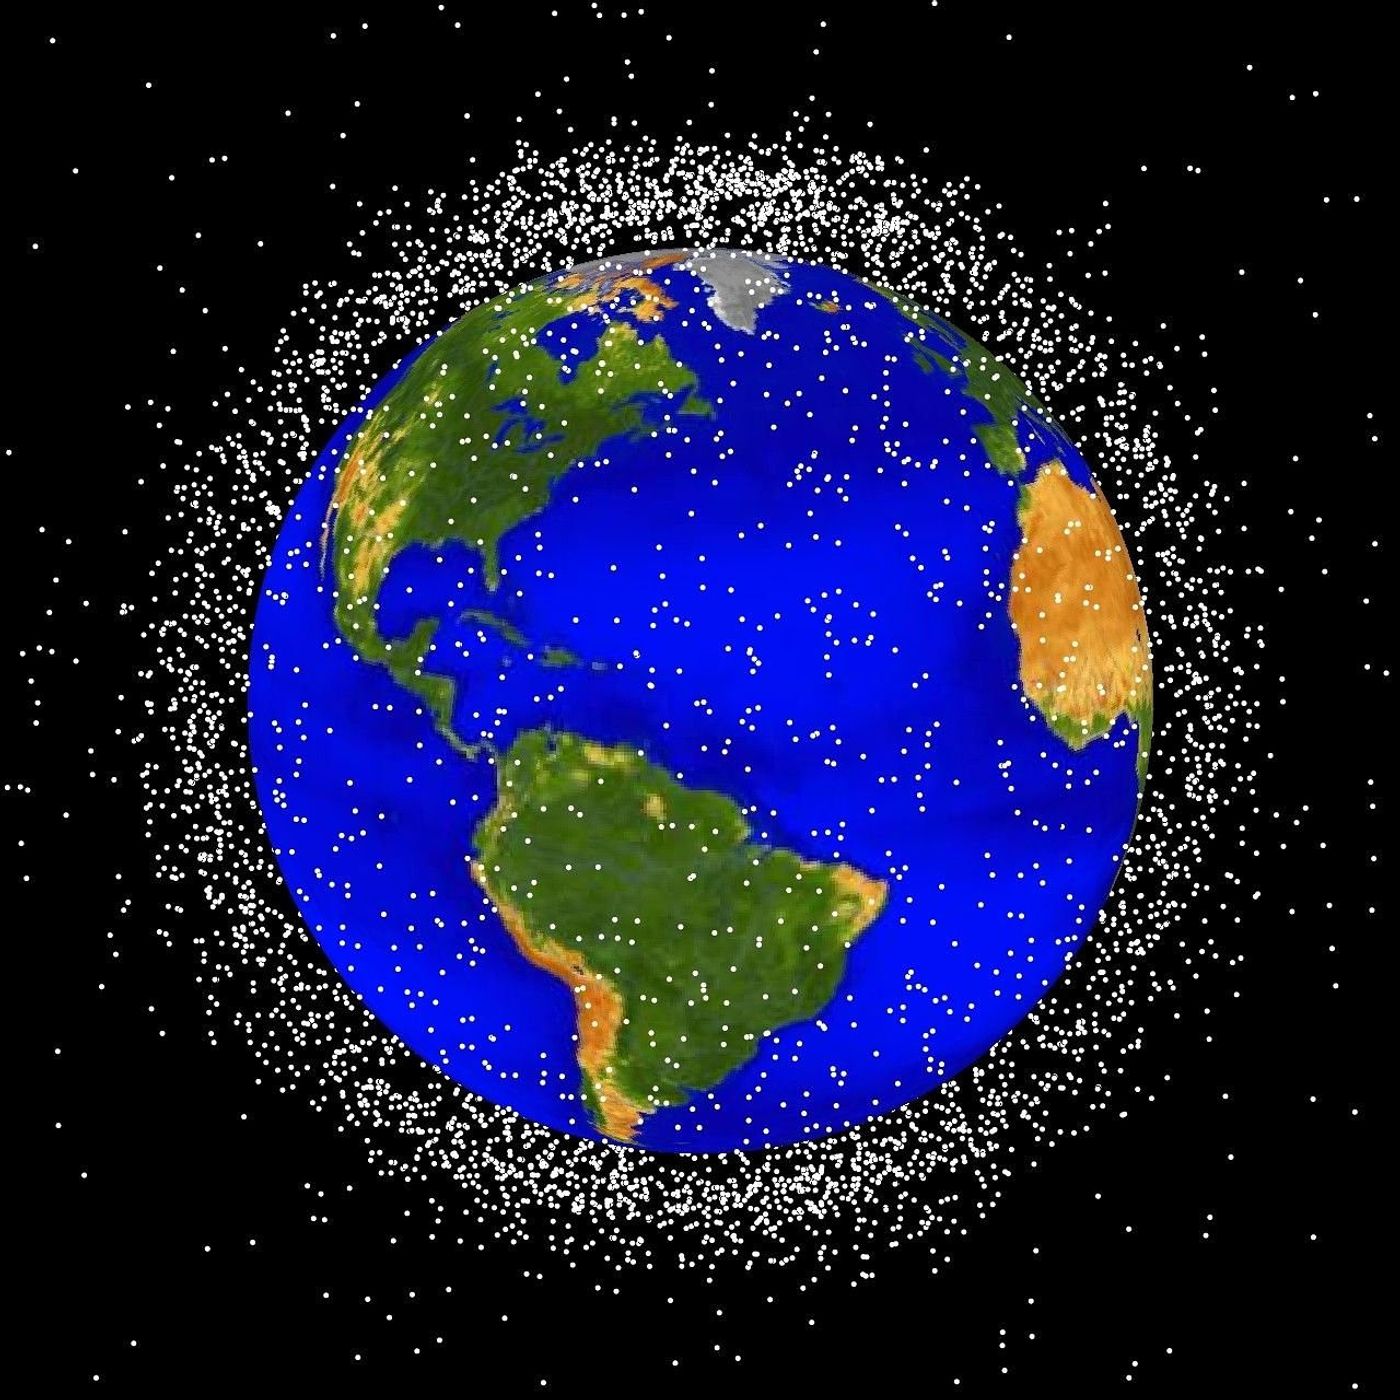 An artist's impression of all the space junk orbiting Earth (not drawn to scale).